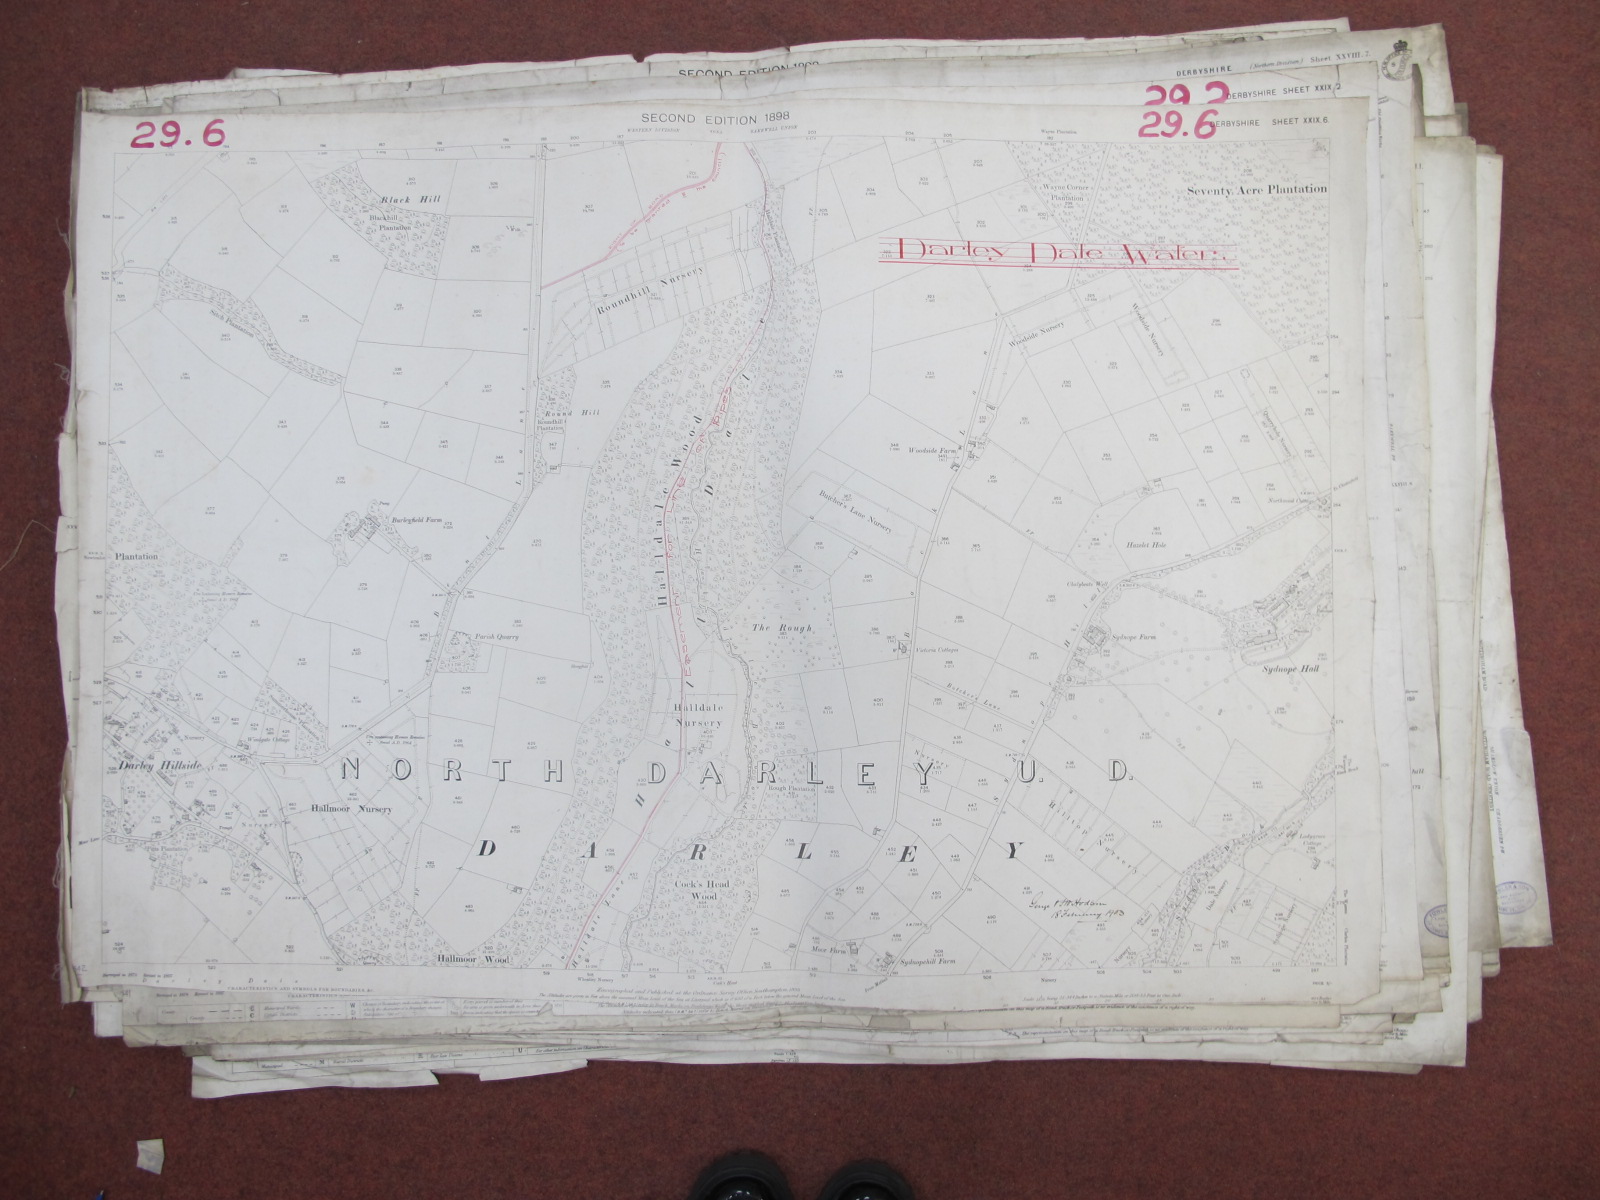 Derbyshire Maps, to include, Matlock Bath, Scarsdale, Cuckoostone Dale, Darley Dale, Youlgreave, - Image 9 of 10